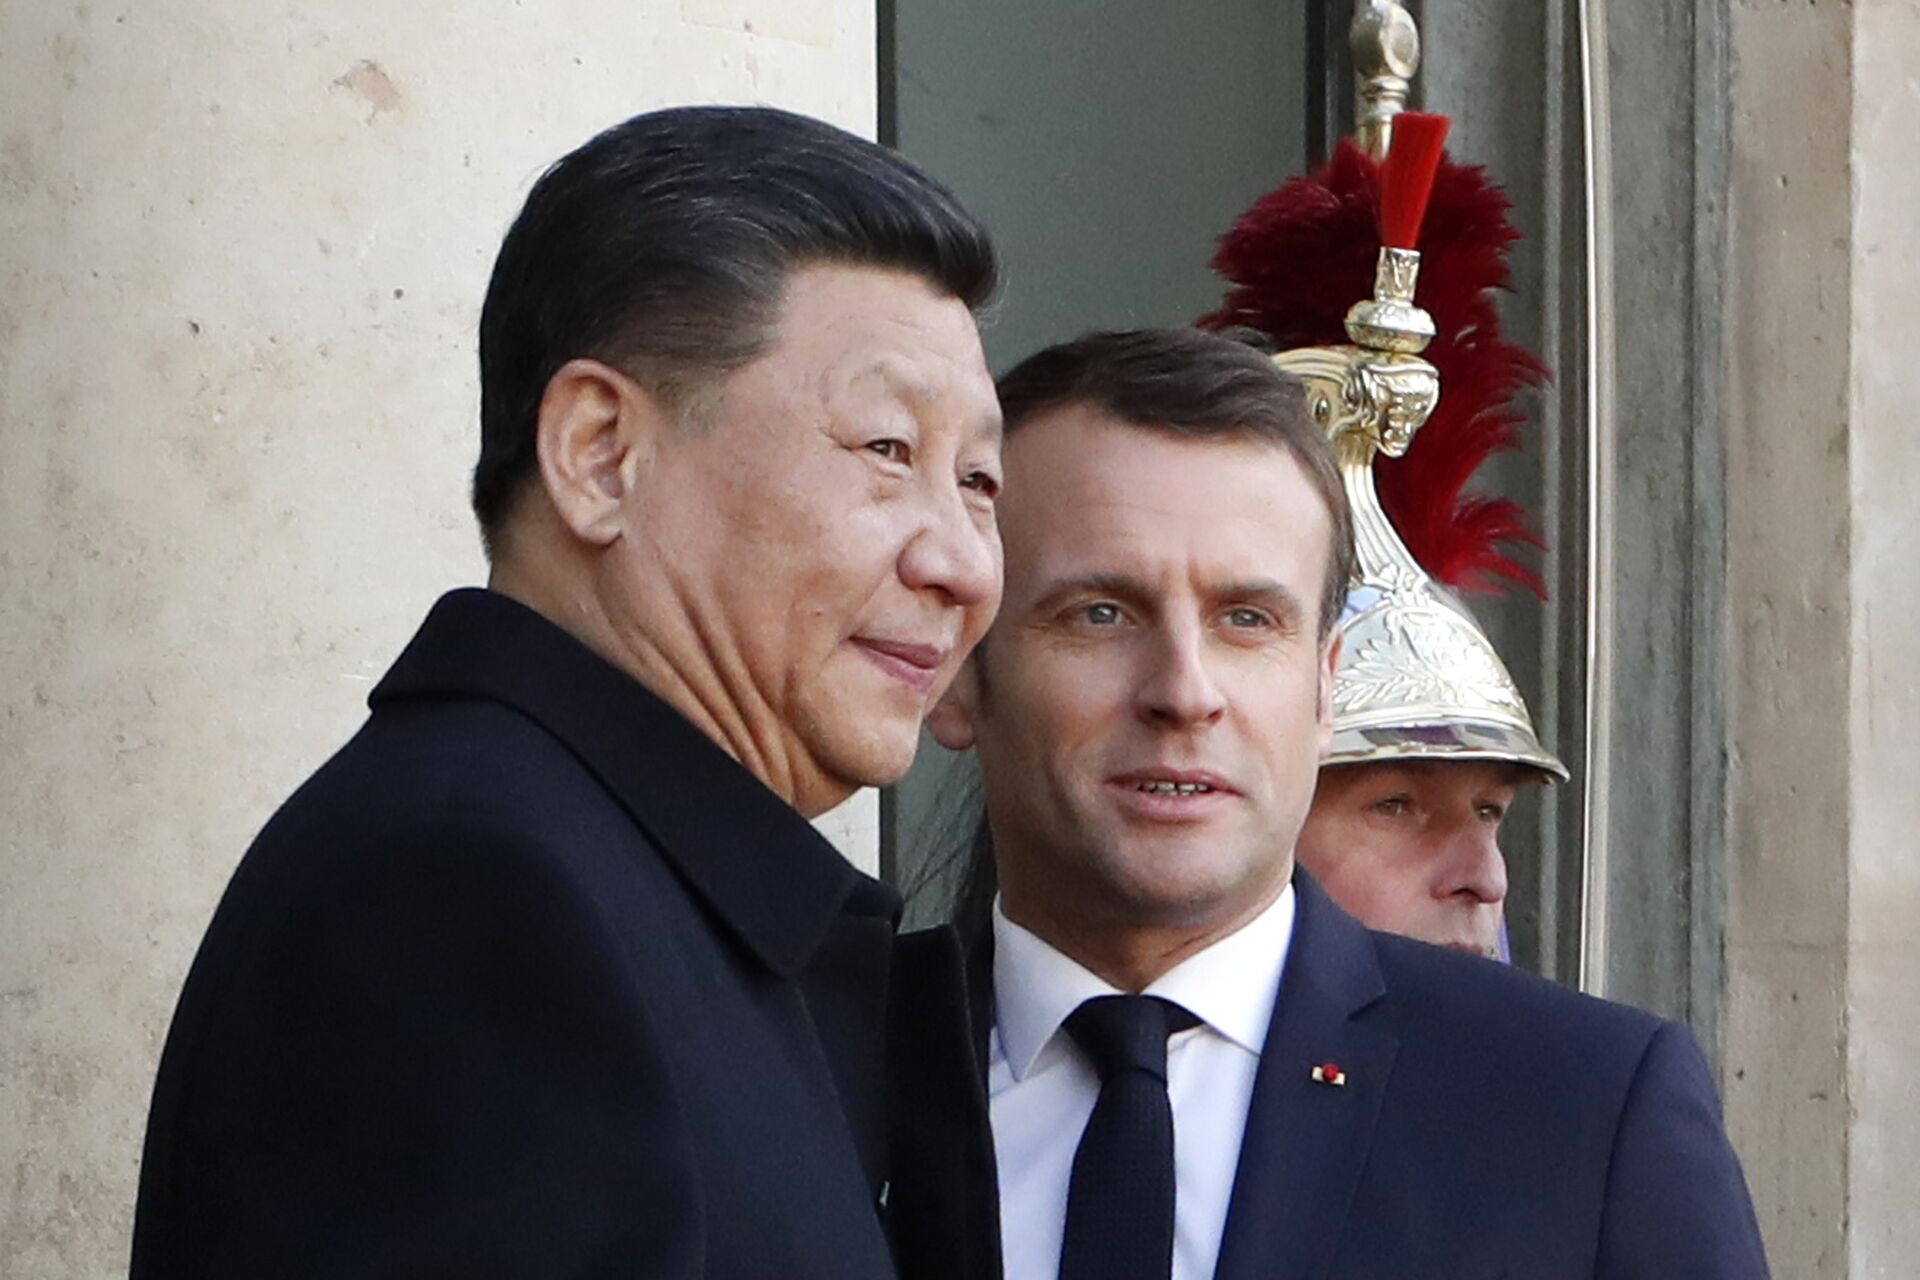 French President Emmanuel Macron, right, welcomes his Chinese counterpart Xi Jinping prior to a meeting at the Elysee Palace, in Paris, Monday, March 25, 2019. - Sputnik International, 1920, 13.10.2021